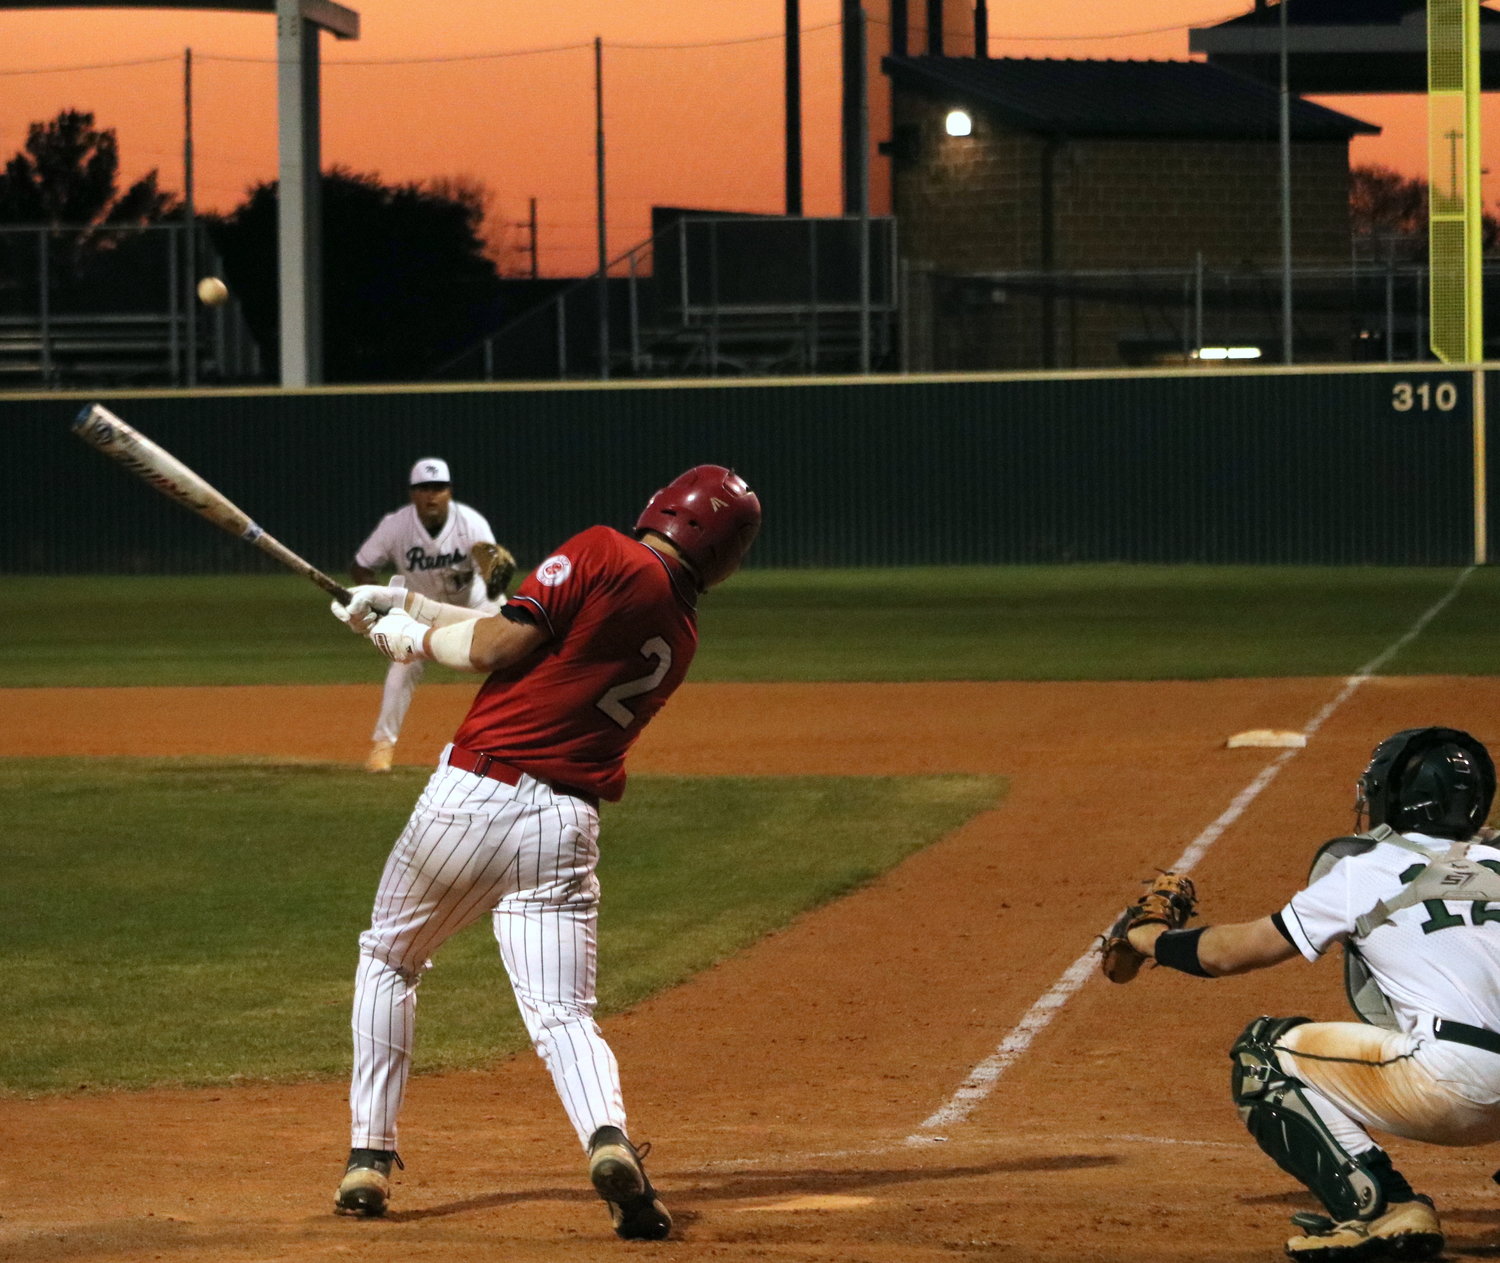 Parker Kidwell hits a ball to right field during Tuesday’s game between Katy and Mayde Creek at the Mayde Creek baseball field.